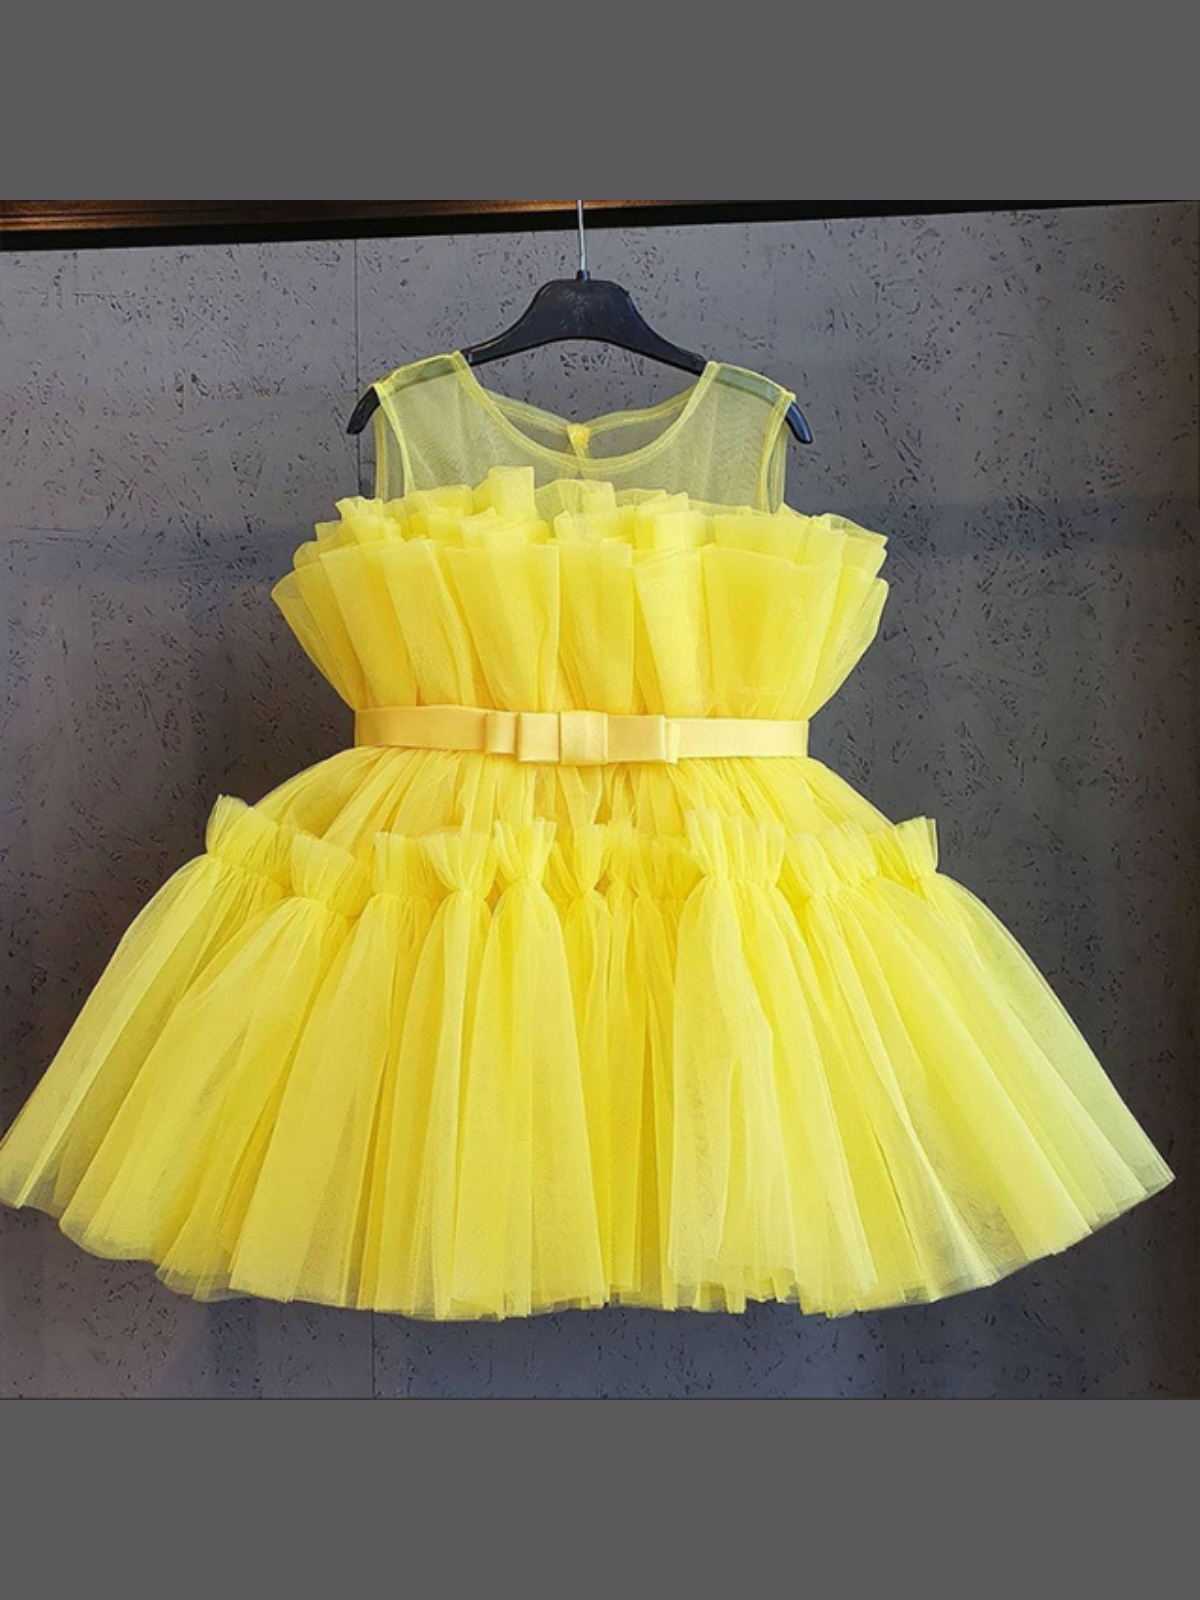 Buy Flower Girl Dress, Yellow Dress, Princess Dress, 1 Year Old Birthday  Dress, Doll Dress, Baptism Dress, Christmas Party Dress, Gift For Online in  India - Etsy